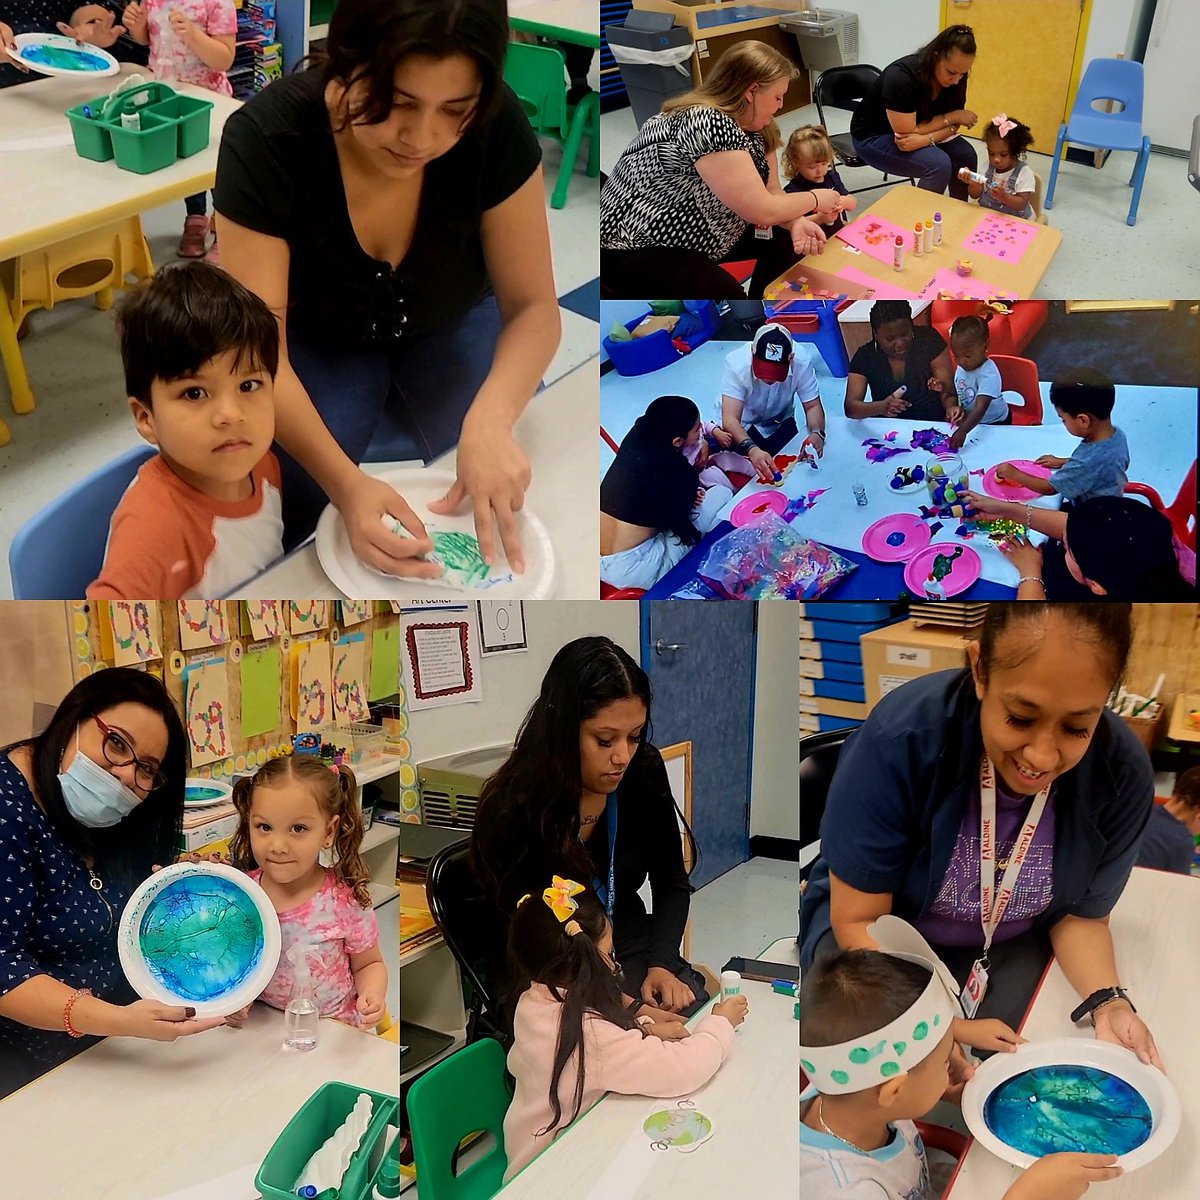 @AldineChild wrapped up the Week of the Young Child, by engaging parents in art projects with their children. It is a fun and meaningful way to strengthen family bonds and create lasting memories.@AldineHeadStart @AldineISD @Primary_AISD @Aldine_FACE @RayMondragon